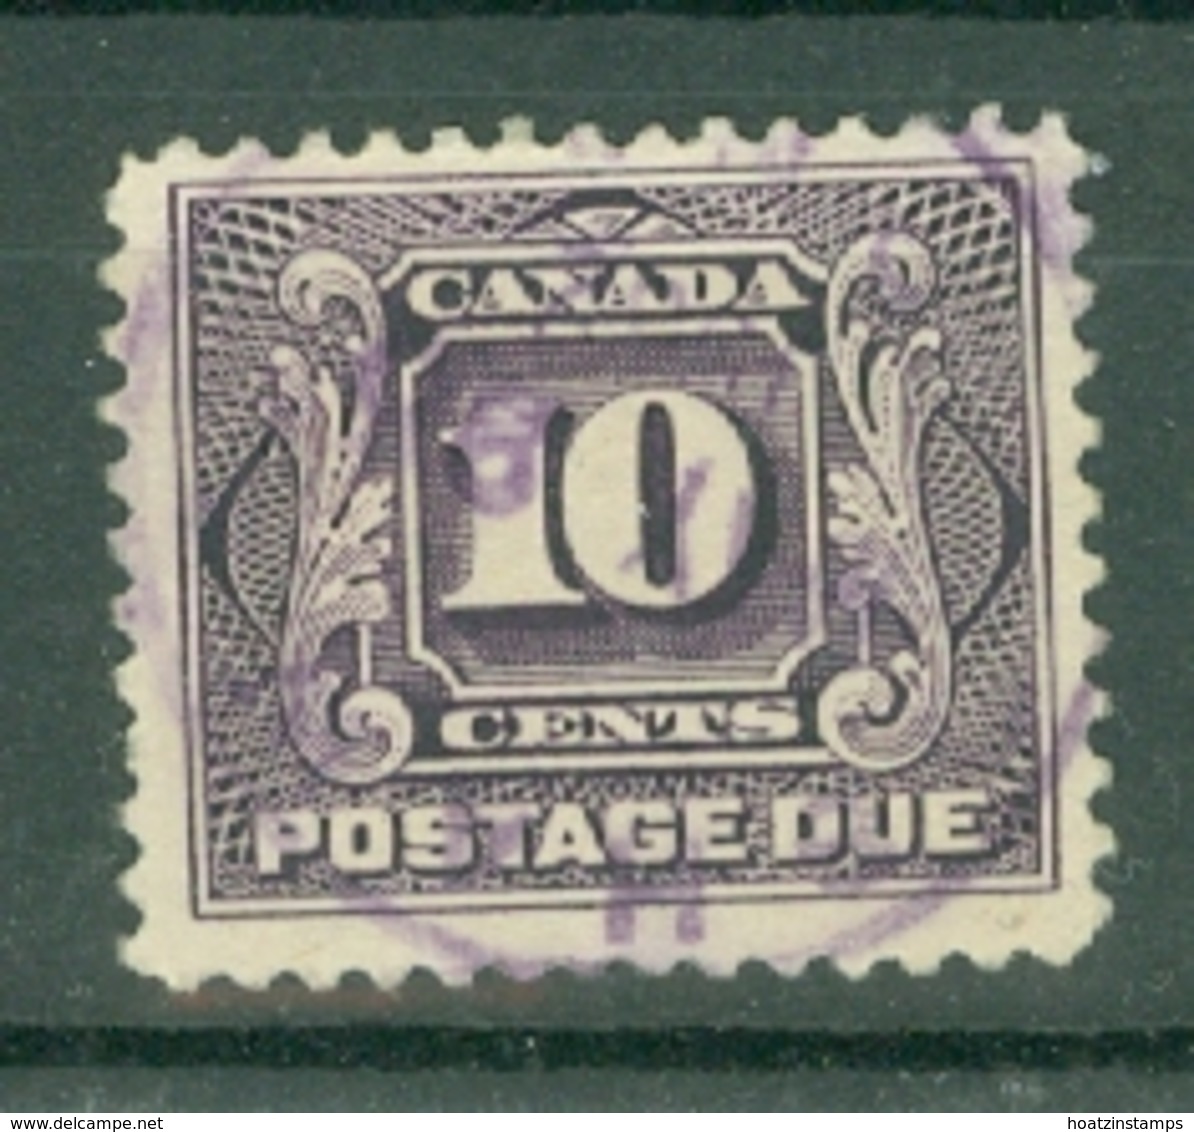 Canada: 1906/28   Postage Due    SG D8    10c   Violet      Used - Postage Due